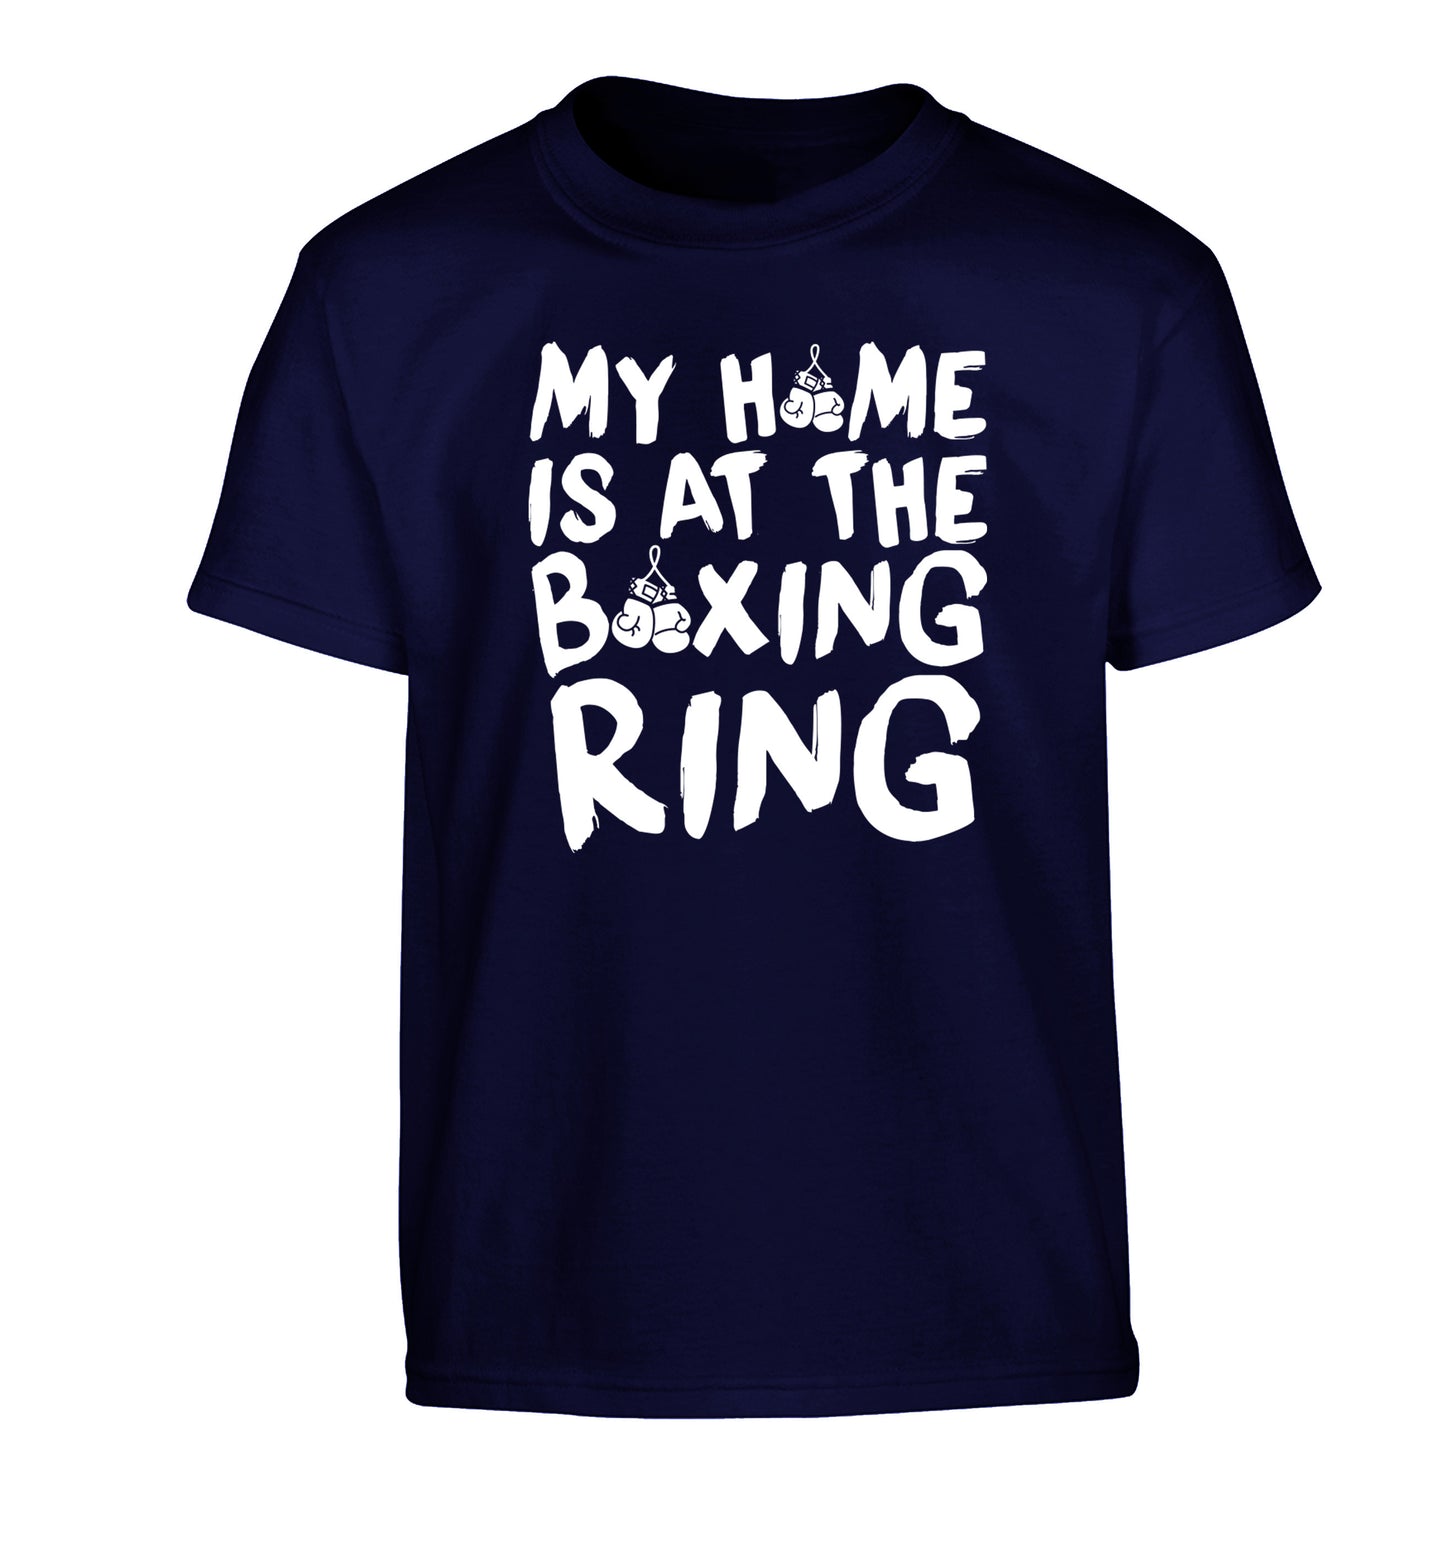 My home is at the boxing ring Children's navy Tshirt 12-14 Years